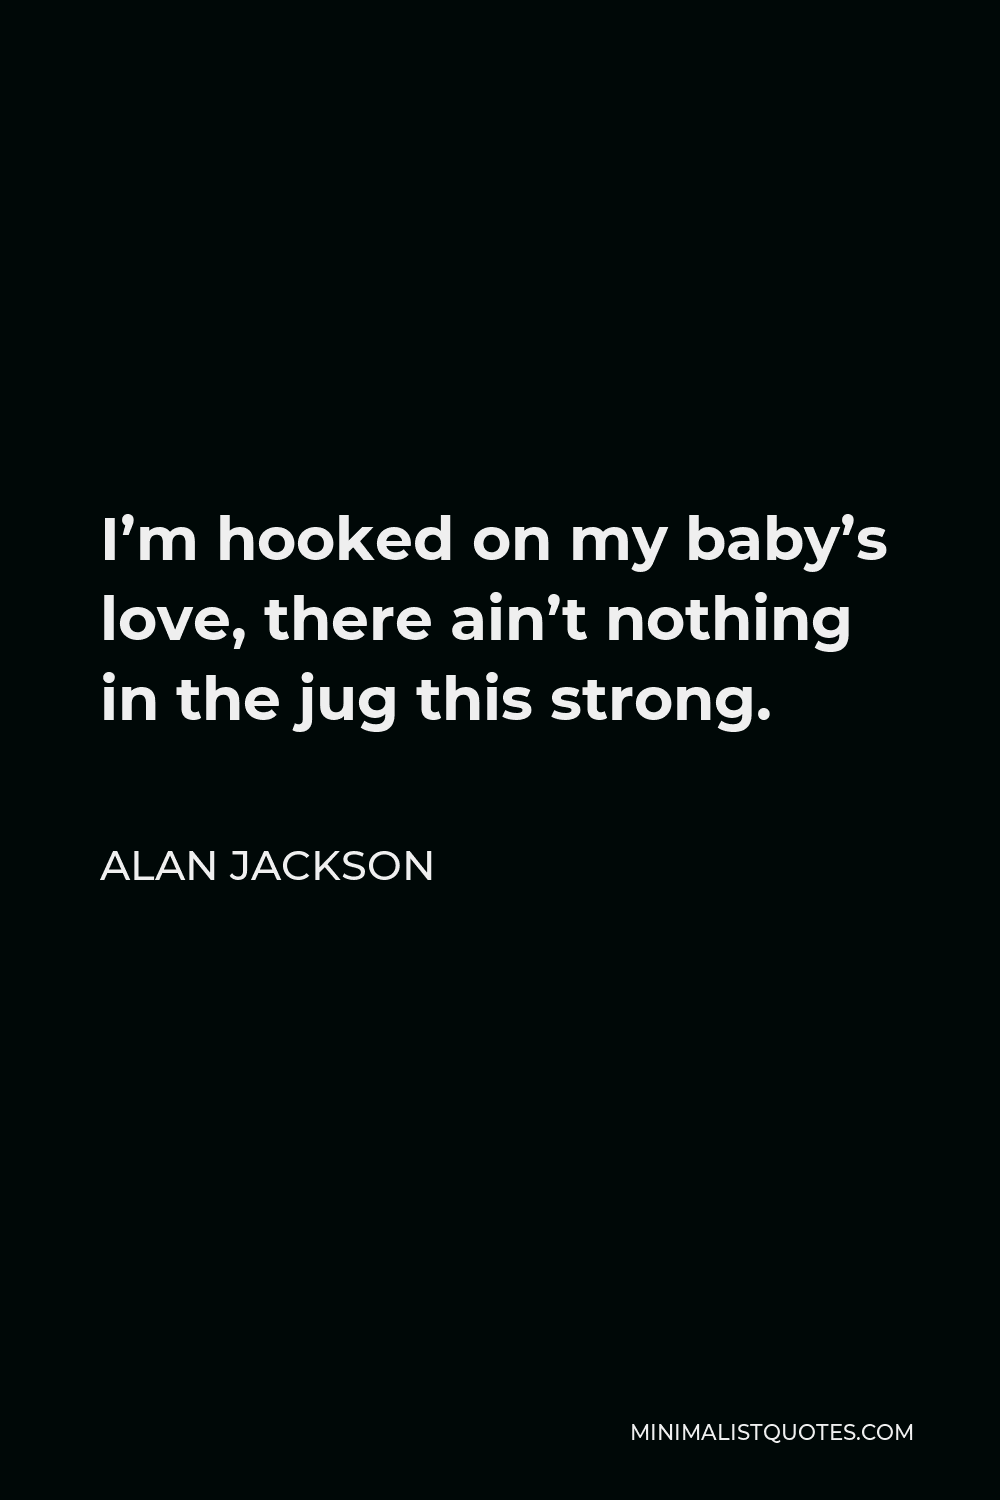 Alan Jackson Quote - I’m hooked on my baby’s love, there ain’t nothing in the jug this strong.